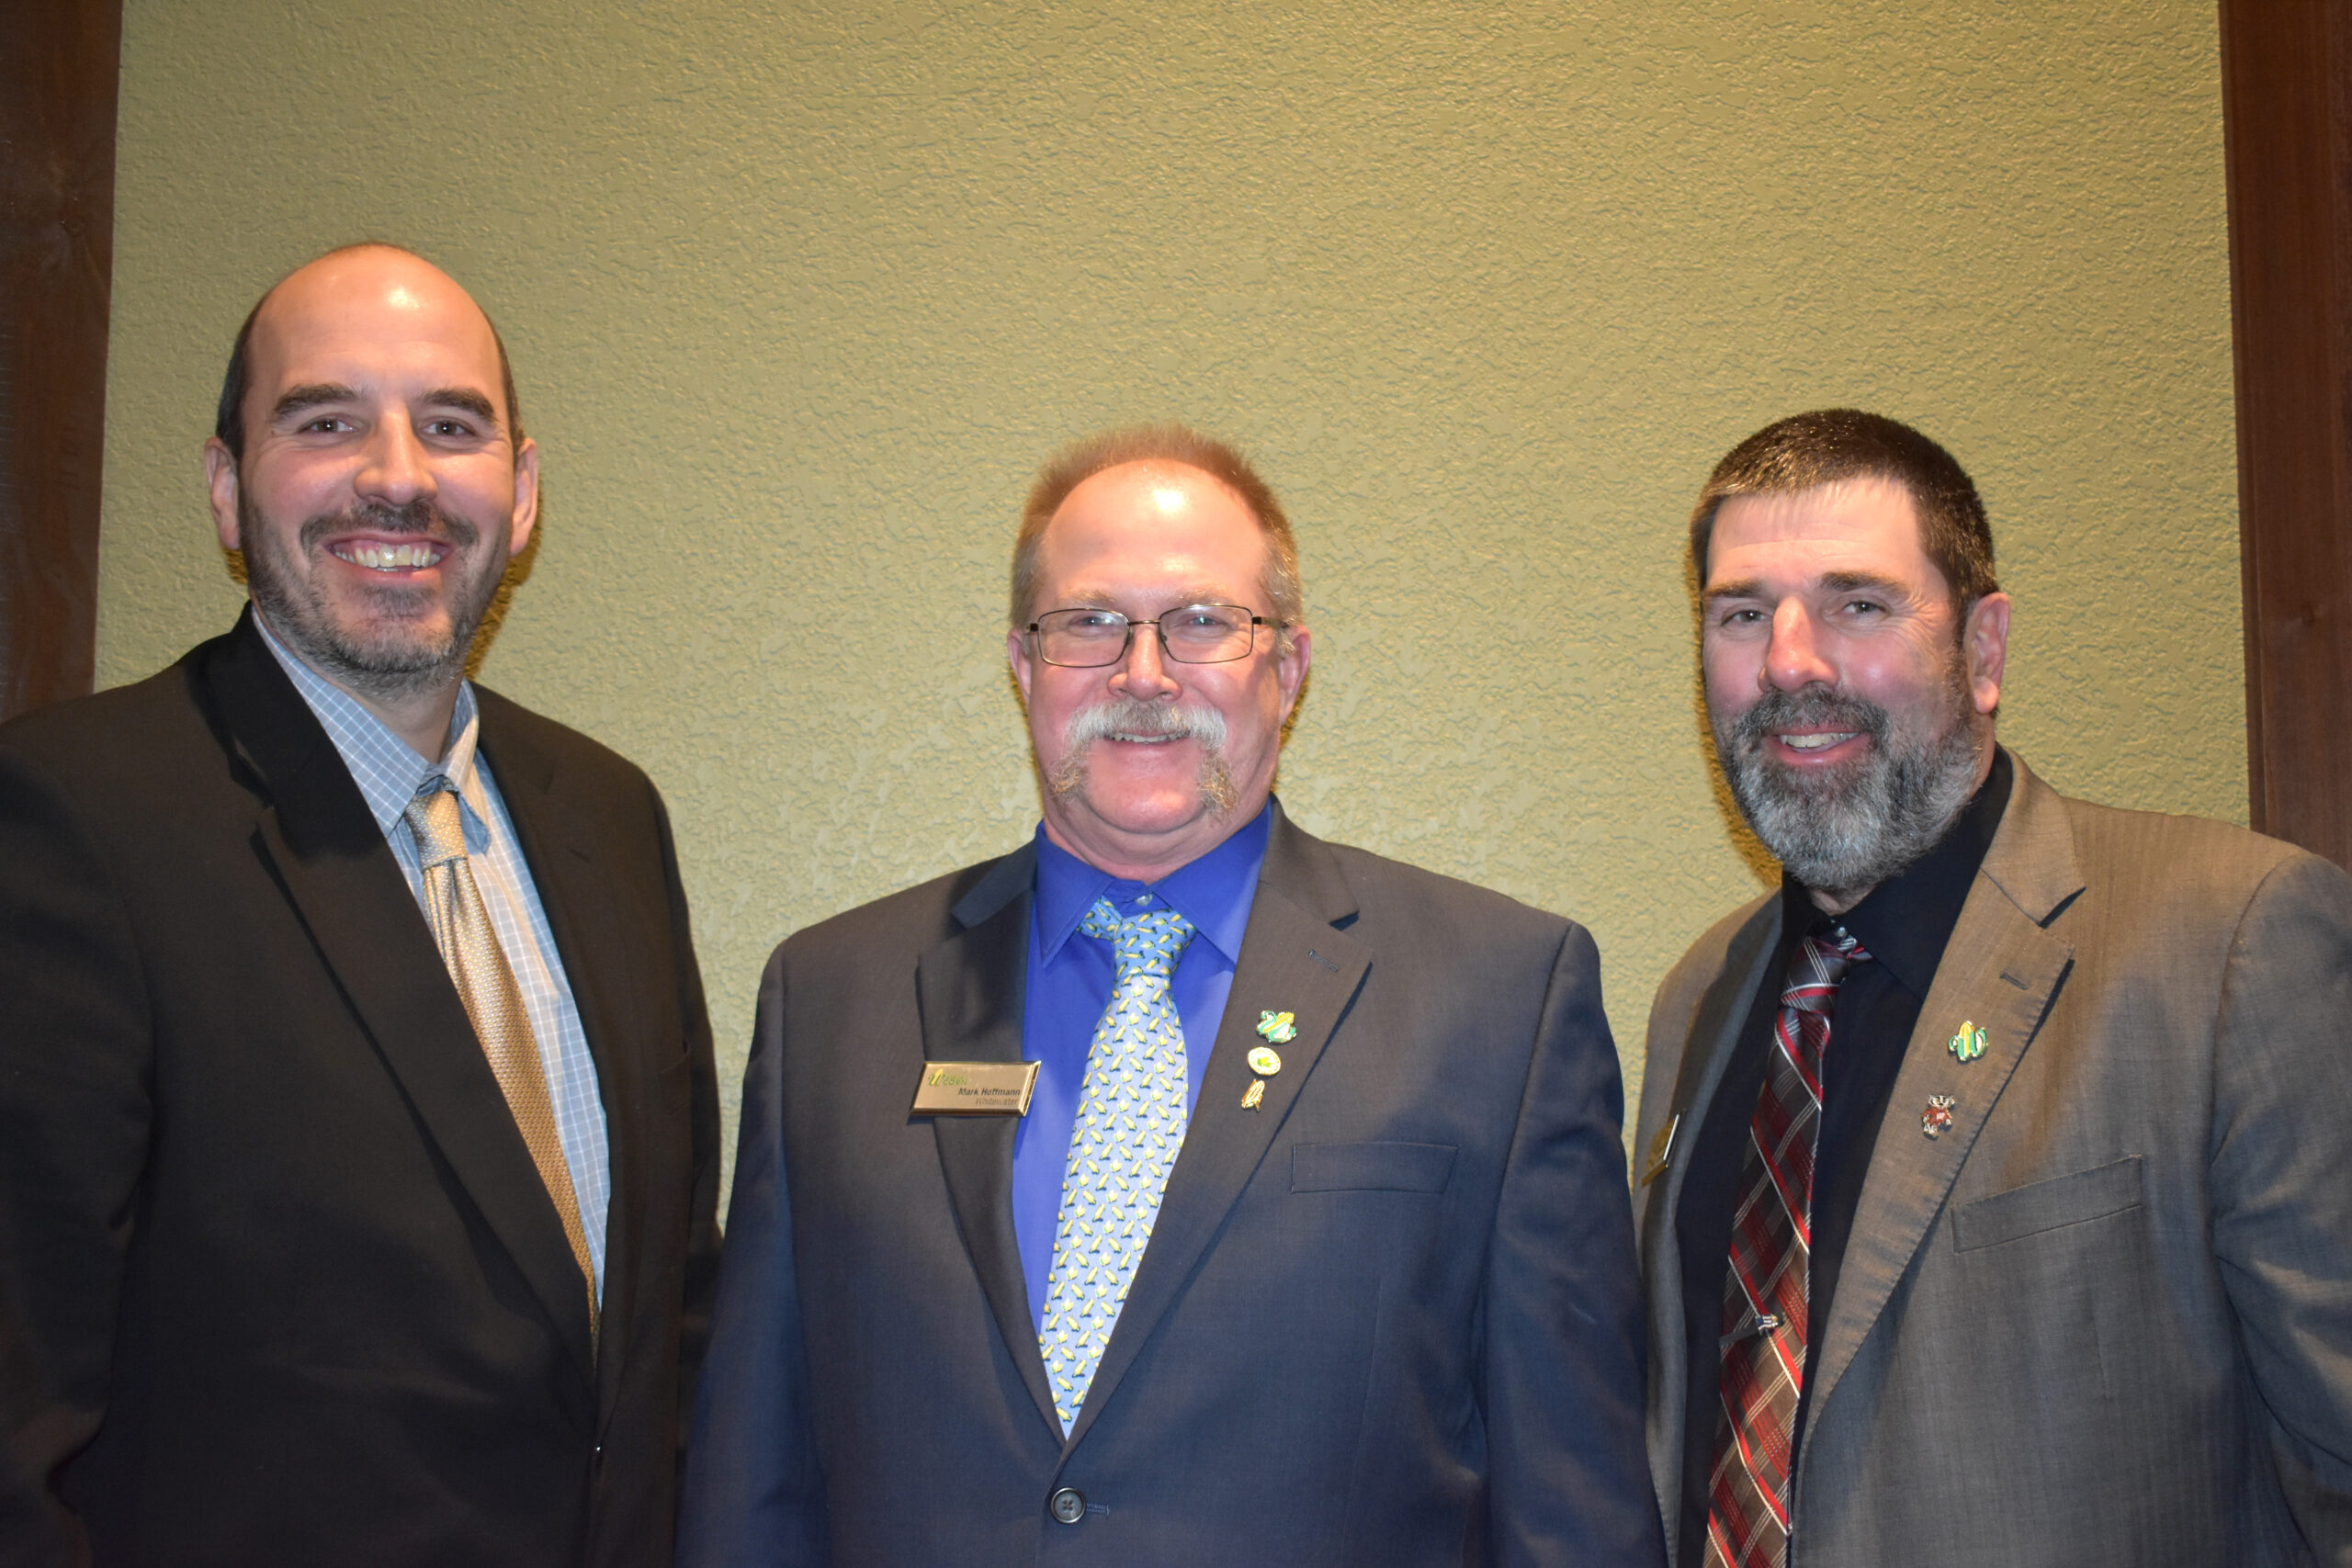 Wisconsin Corn Growers Association elects new board members, officer team